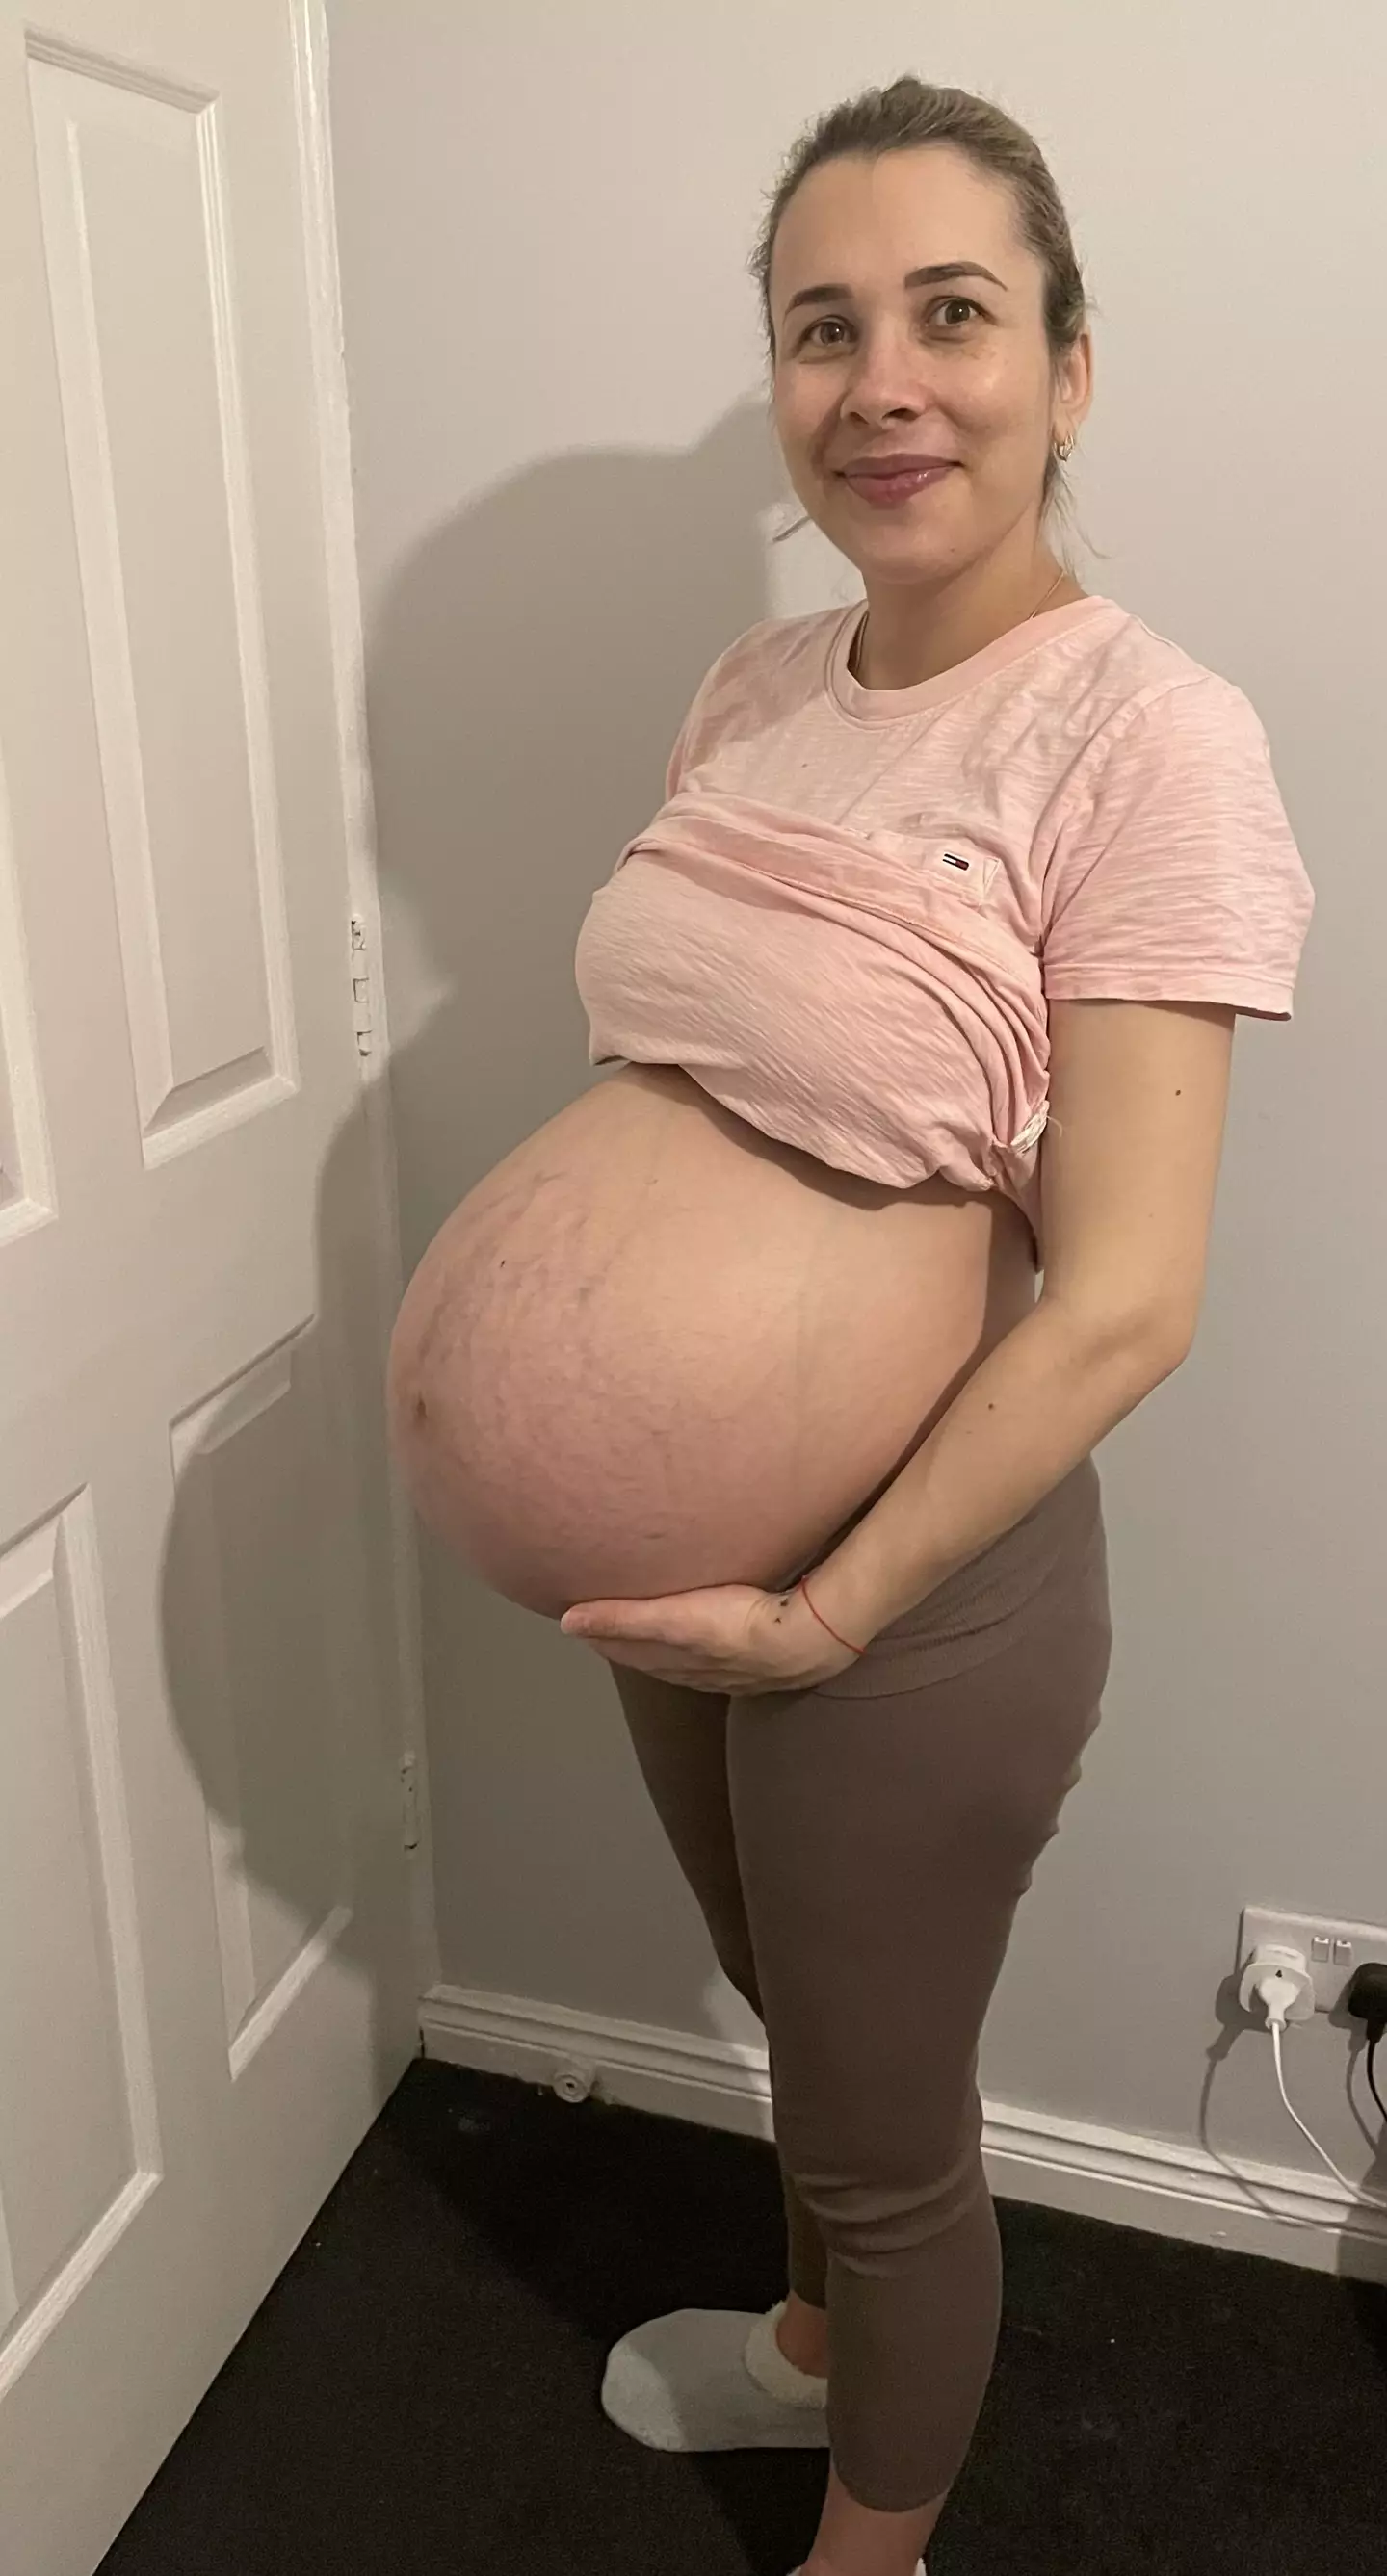 Alina described the miracle pregnancy as 'hard' and 'painful'.